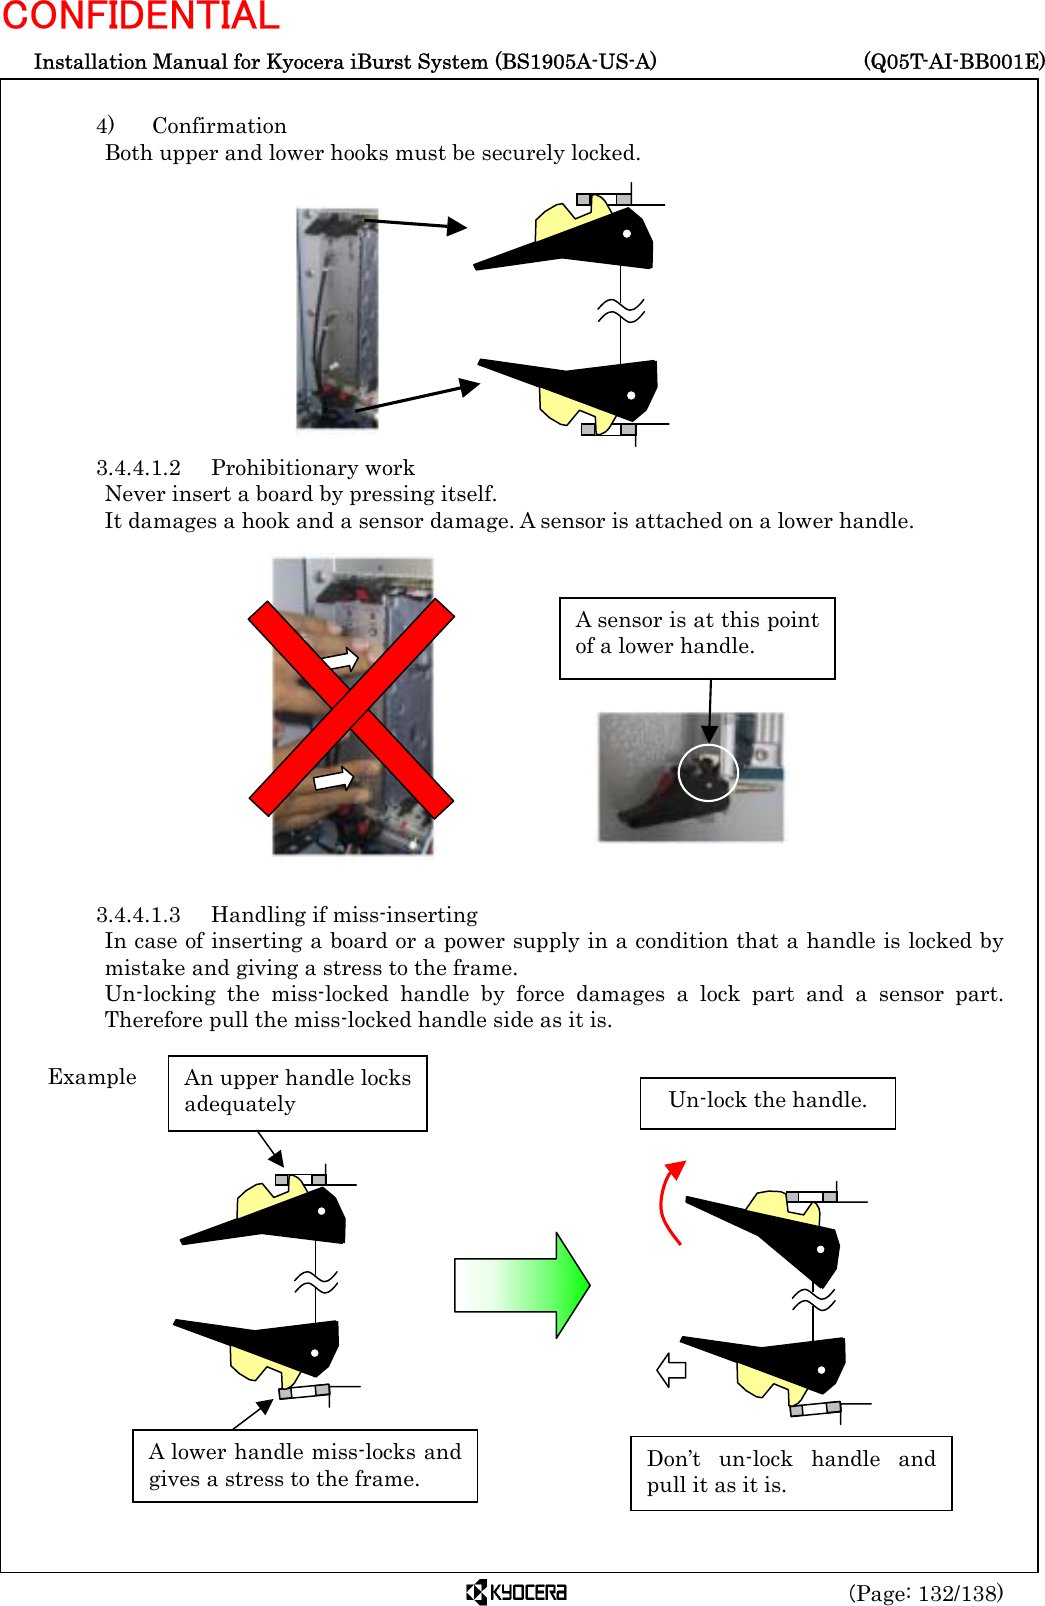  Installation Manual for Kyocera iBurst System (BS1905A-US-A)     (Q05T-AI-BB001E) (Page: 132/138) CONFIDENTIAL  4)   Confirmation Both upper and lower hooks must be securely locked.            3.4.4.1.2 Prohibitionary work Never insert a board by pressing itself. It damages a hook and a sensor damage. A sensor is attached on a lower handle.               3.4.4.1.3  Handling if miss-inserting In case of inserting a board or a power supply in a condition that a handle is locked by mistake and giving a stress to the frame. Un-locking the miss-locked handle by force damages a lock part and a sensor part. Therefore pull the miss-locked handle side as it is.                     A lower handle miss-locks andgives a stress to the frame. An upper handle locksadequately Example Un-lock the handle. Don’t un-lock handle andpull it as it is. A sensor is at this pointof a lower handle. 